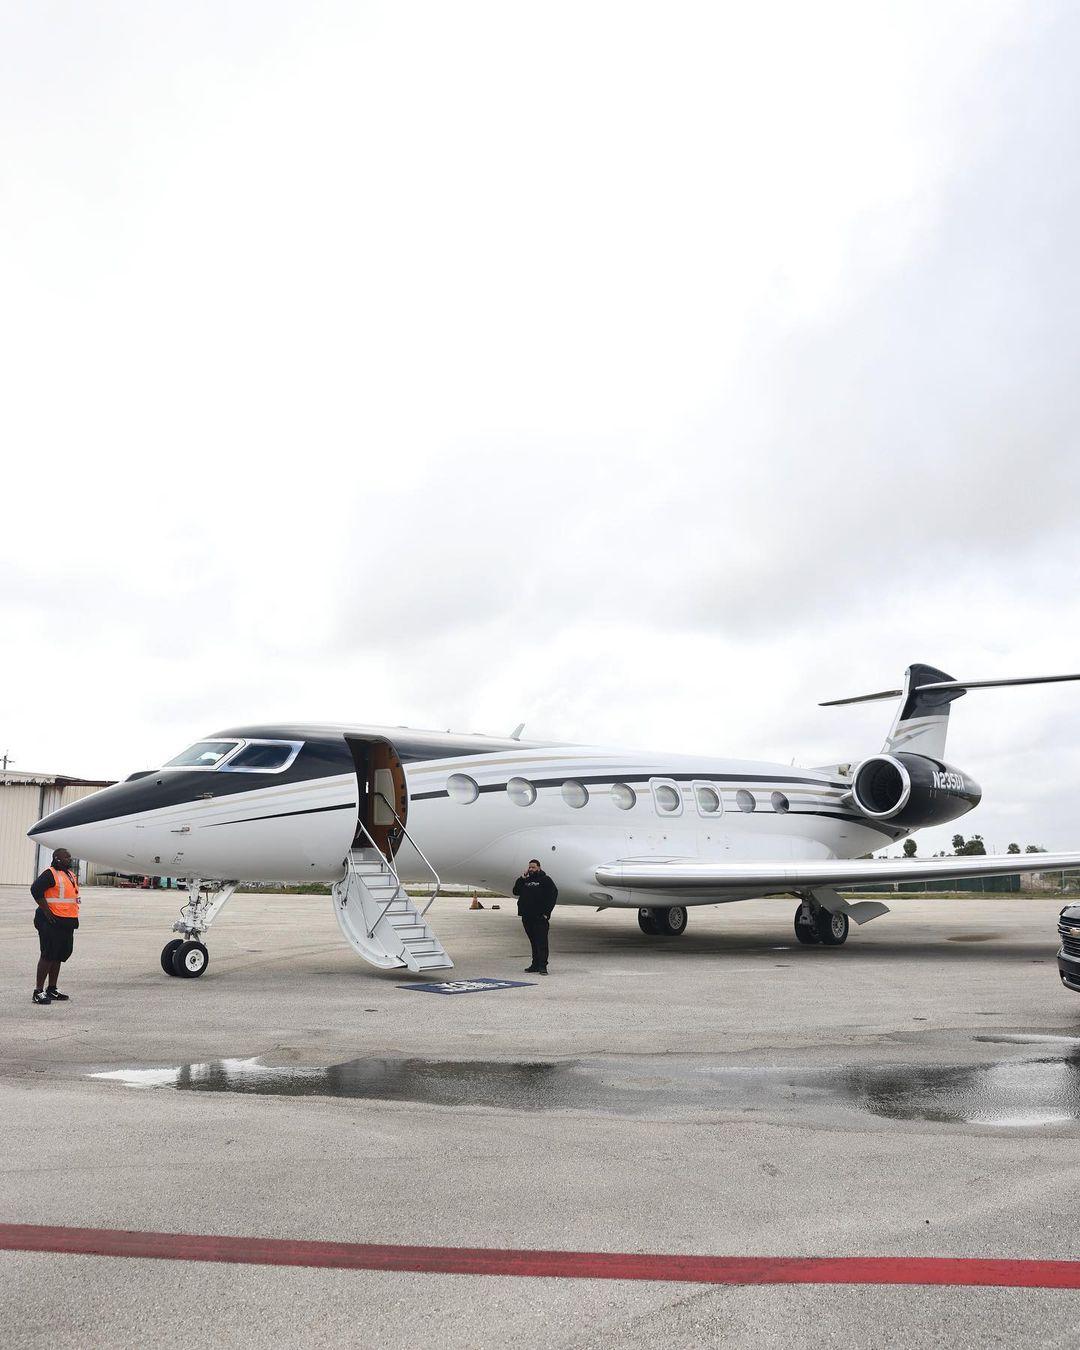 DJ Khaled flaunts his Gulfstream G650 private jet and rare convertible  Maybach on Instagram giving a glimpse of his extravagant lifestyle -  Luxurylaunches